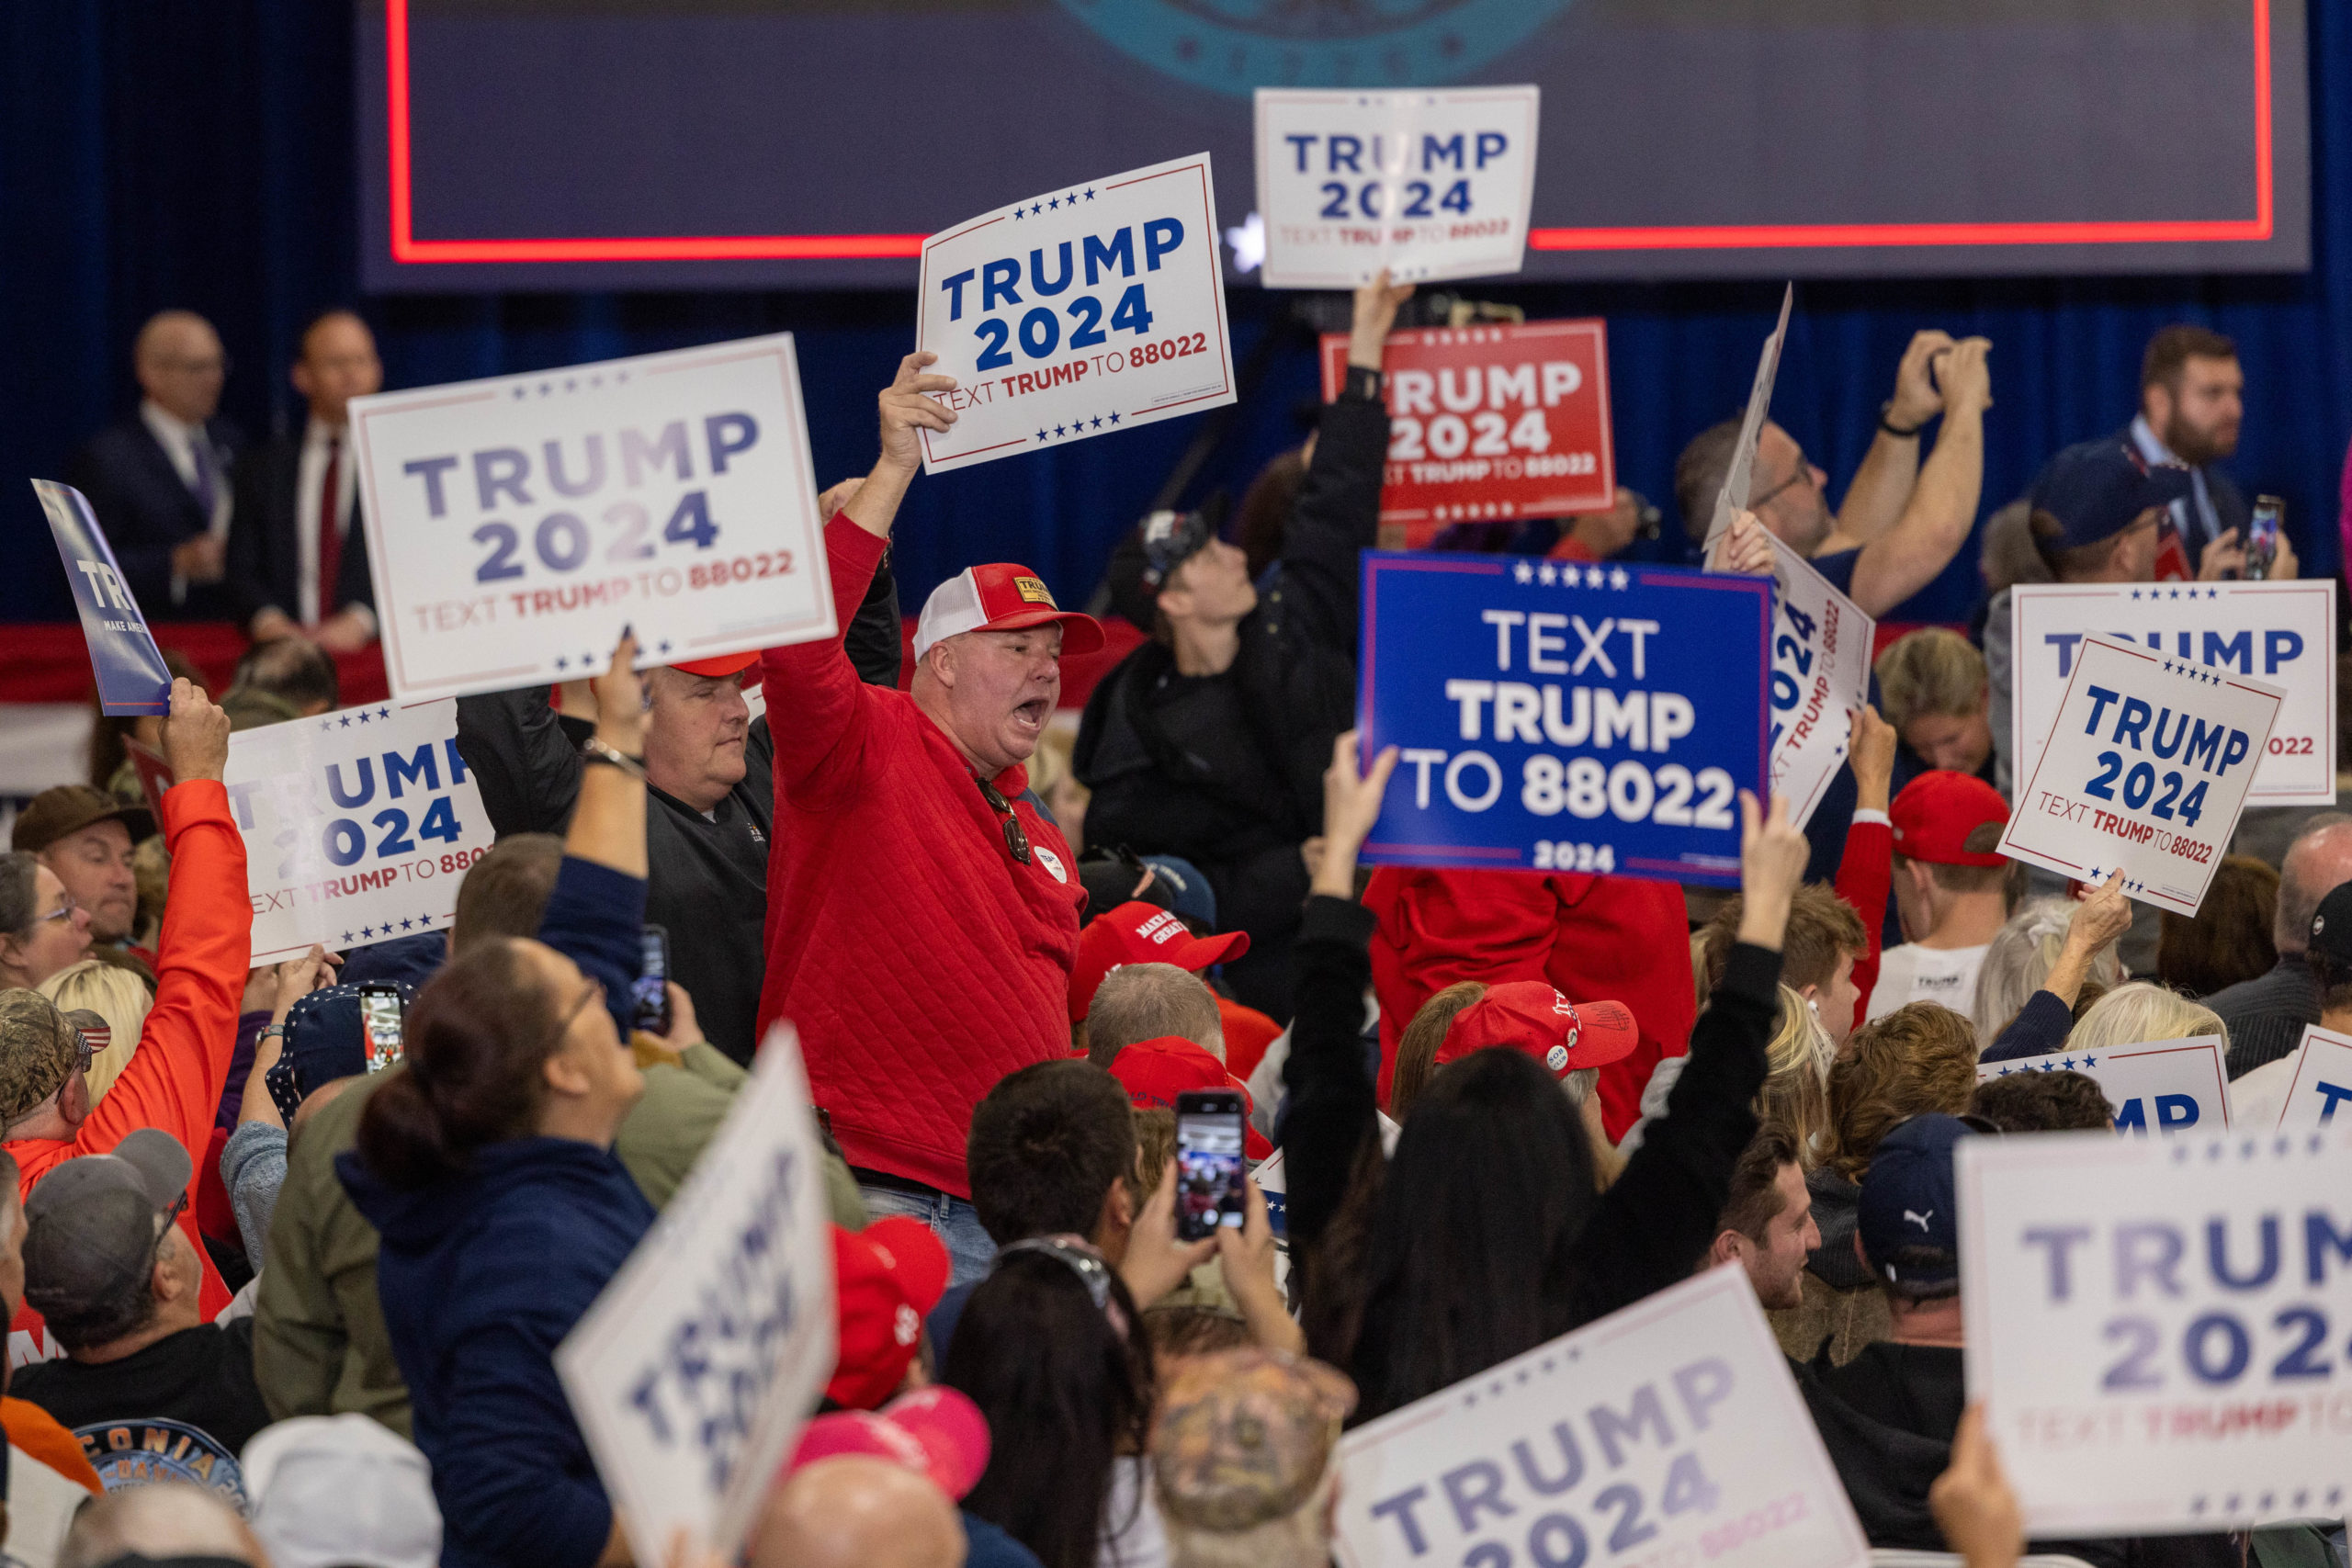 Supporters of Republican presidential candidate former President Donald Trump cheer before an event on October 23, 2023 in Derry, New Hampshire. Trump officially filed for the first-in-the-nation primary on Monday at the New Hampshire State House. (Photo by Scott Eisen/Getty Images)